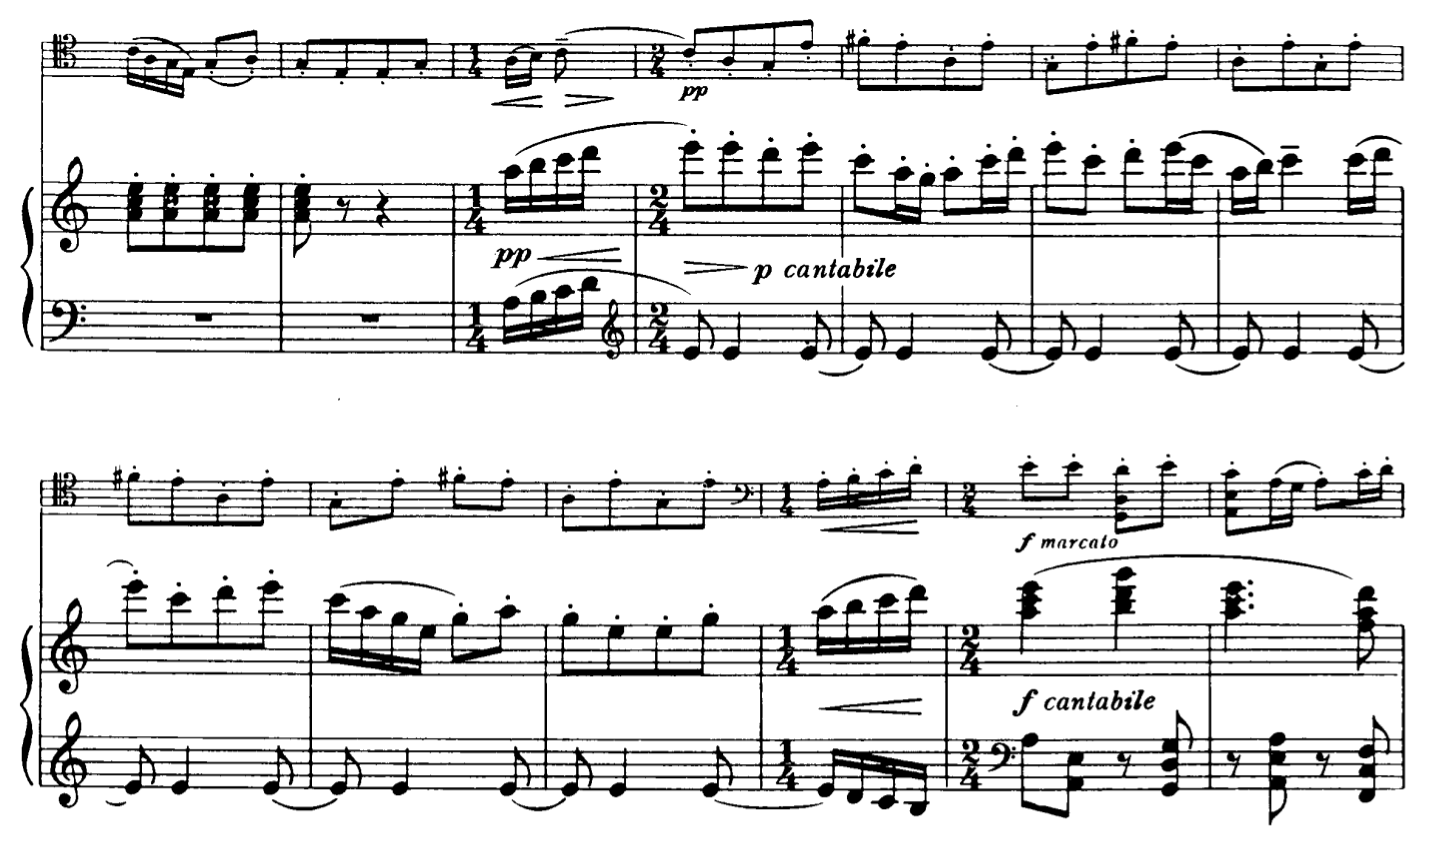 first repeat of the theme by the piano